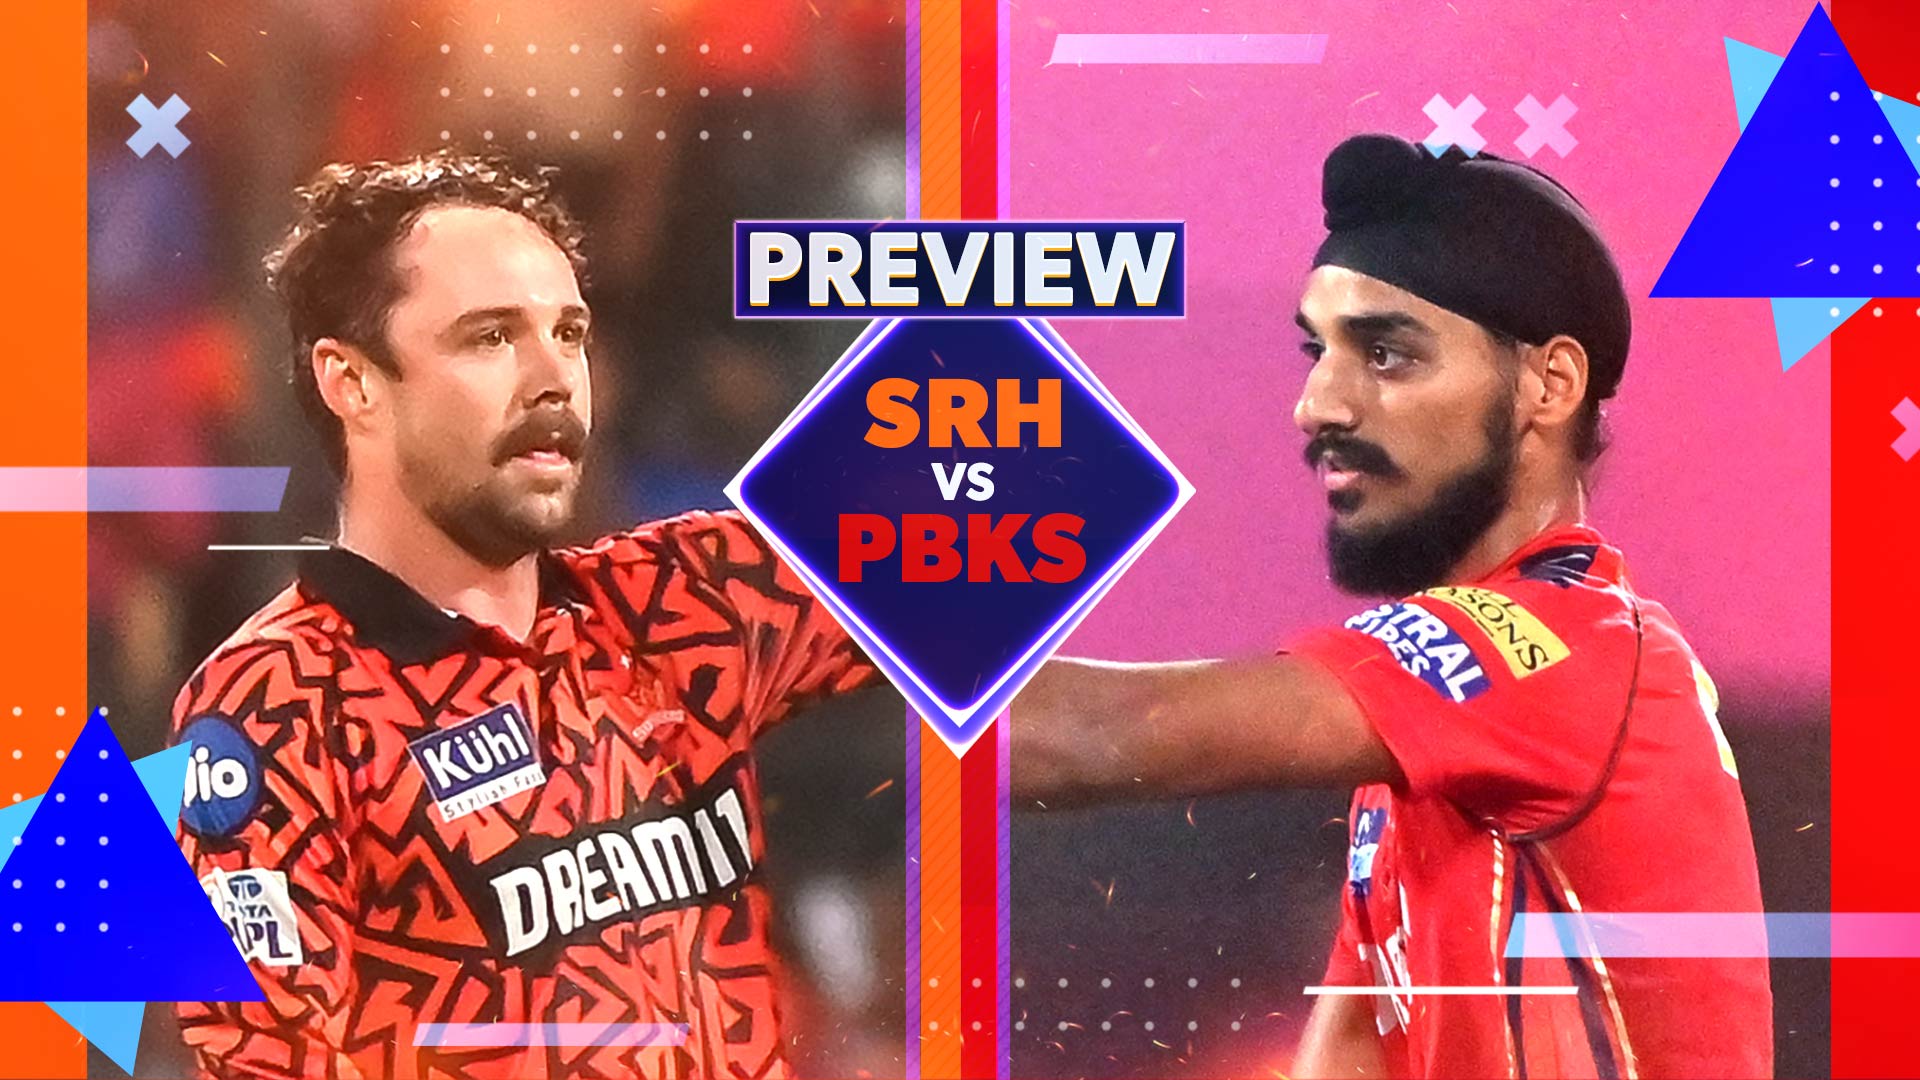 SRH vs PBKS: All You Need to Know